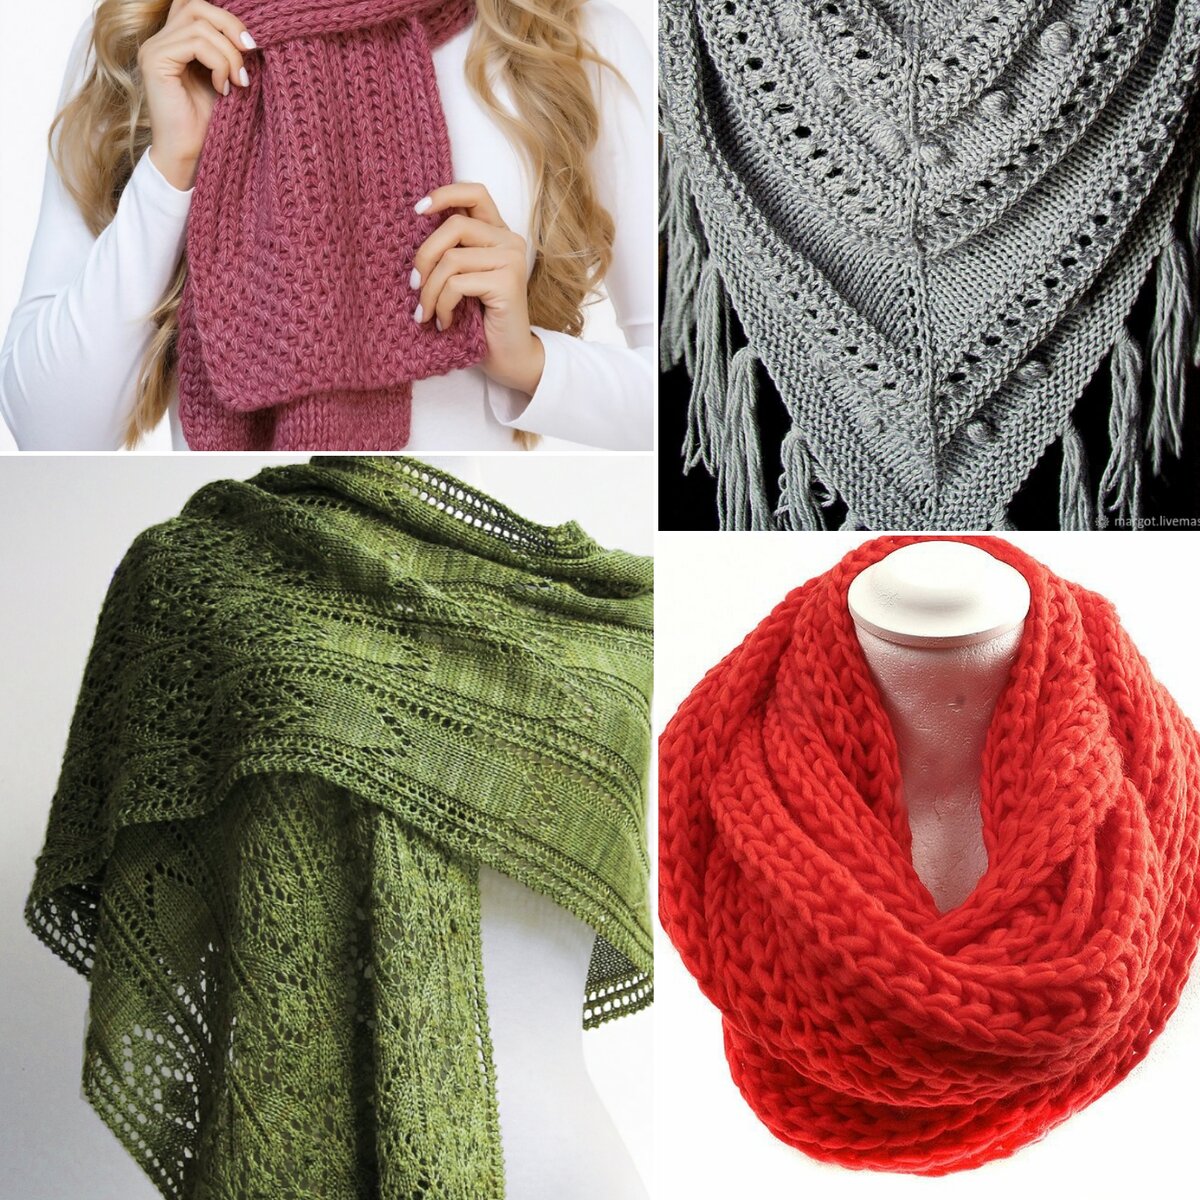 Graham / DROPS Extra 0-972 - Free knitting patterns by DROPS Design